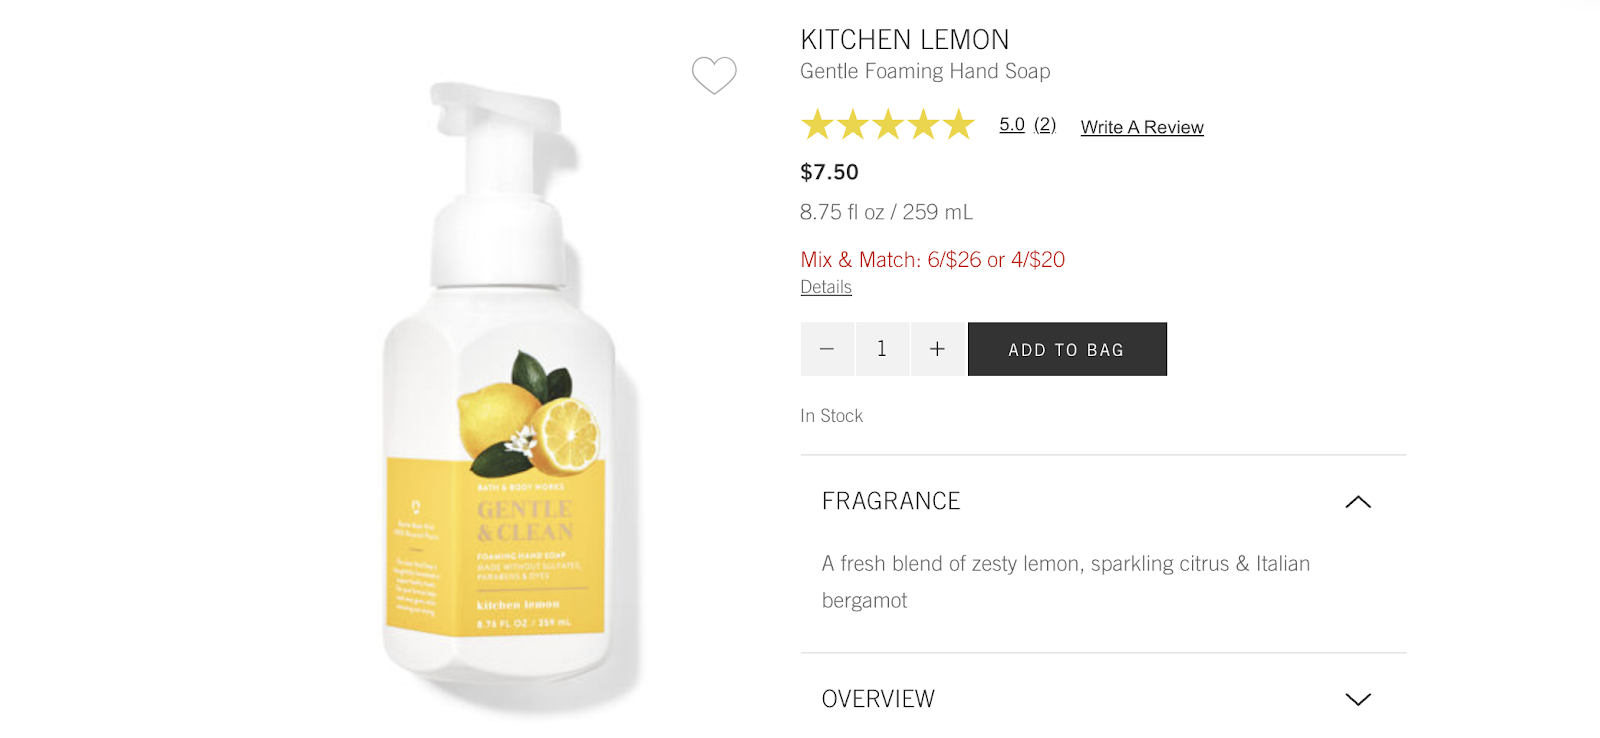 A screenshot of Bath and Body Works' Kitchen Lemon hand soap as a product description template example.